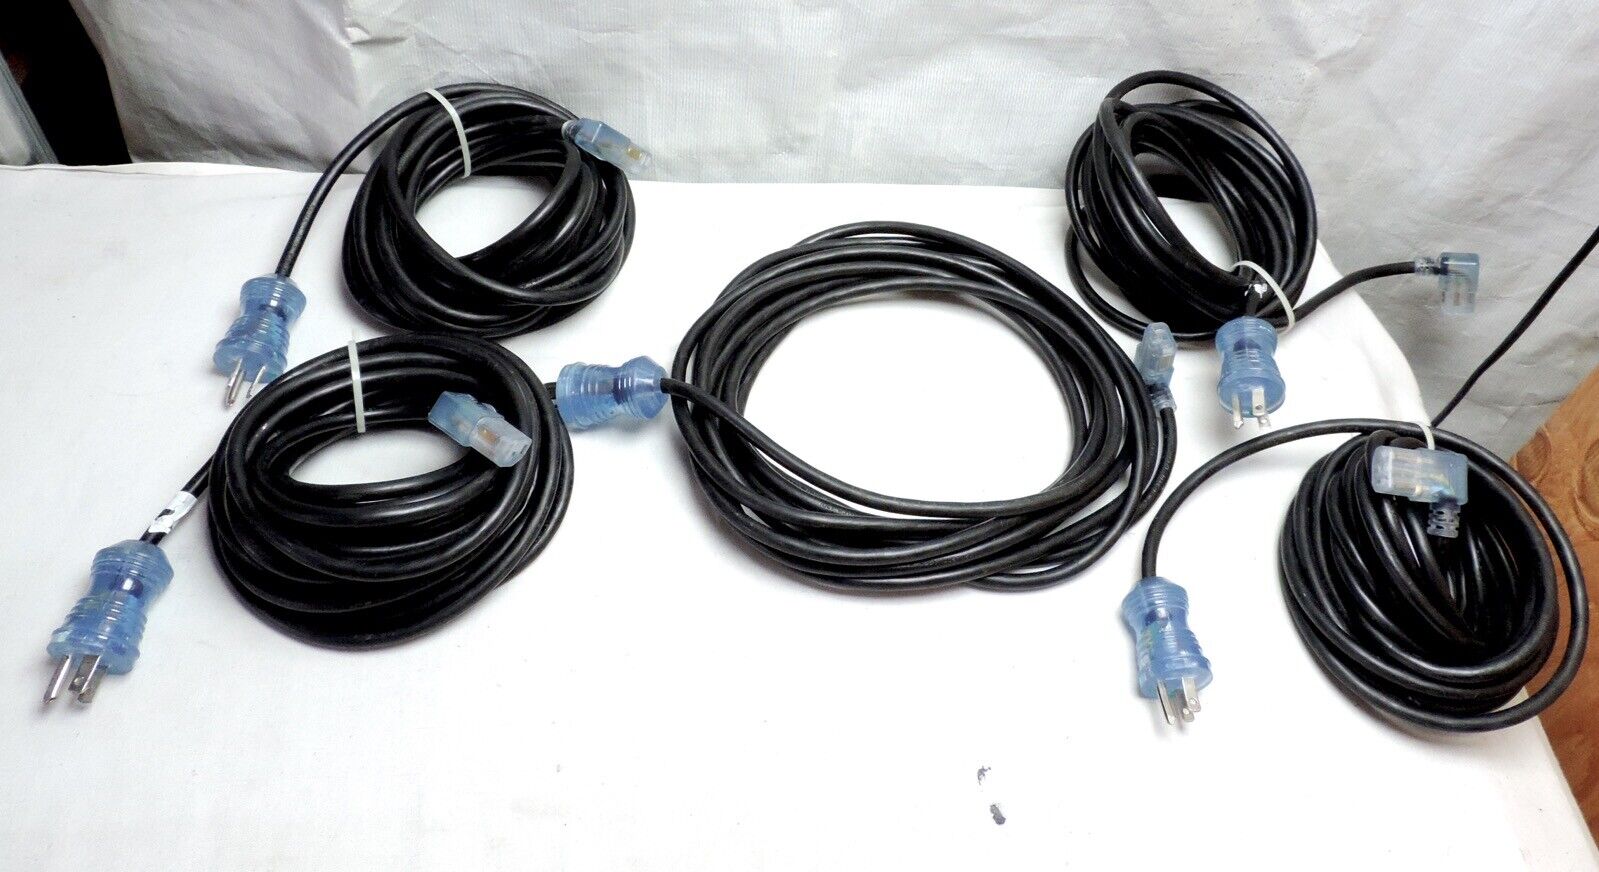 Lot of 5 Medical Hospital Grade Power Cables High Quality 22' Each - Well Shin